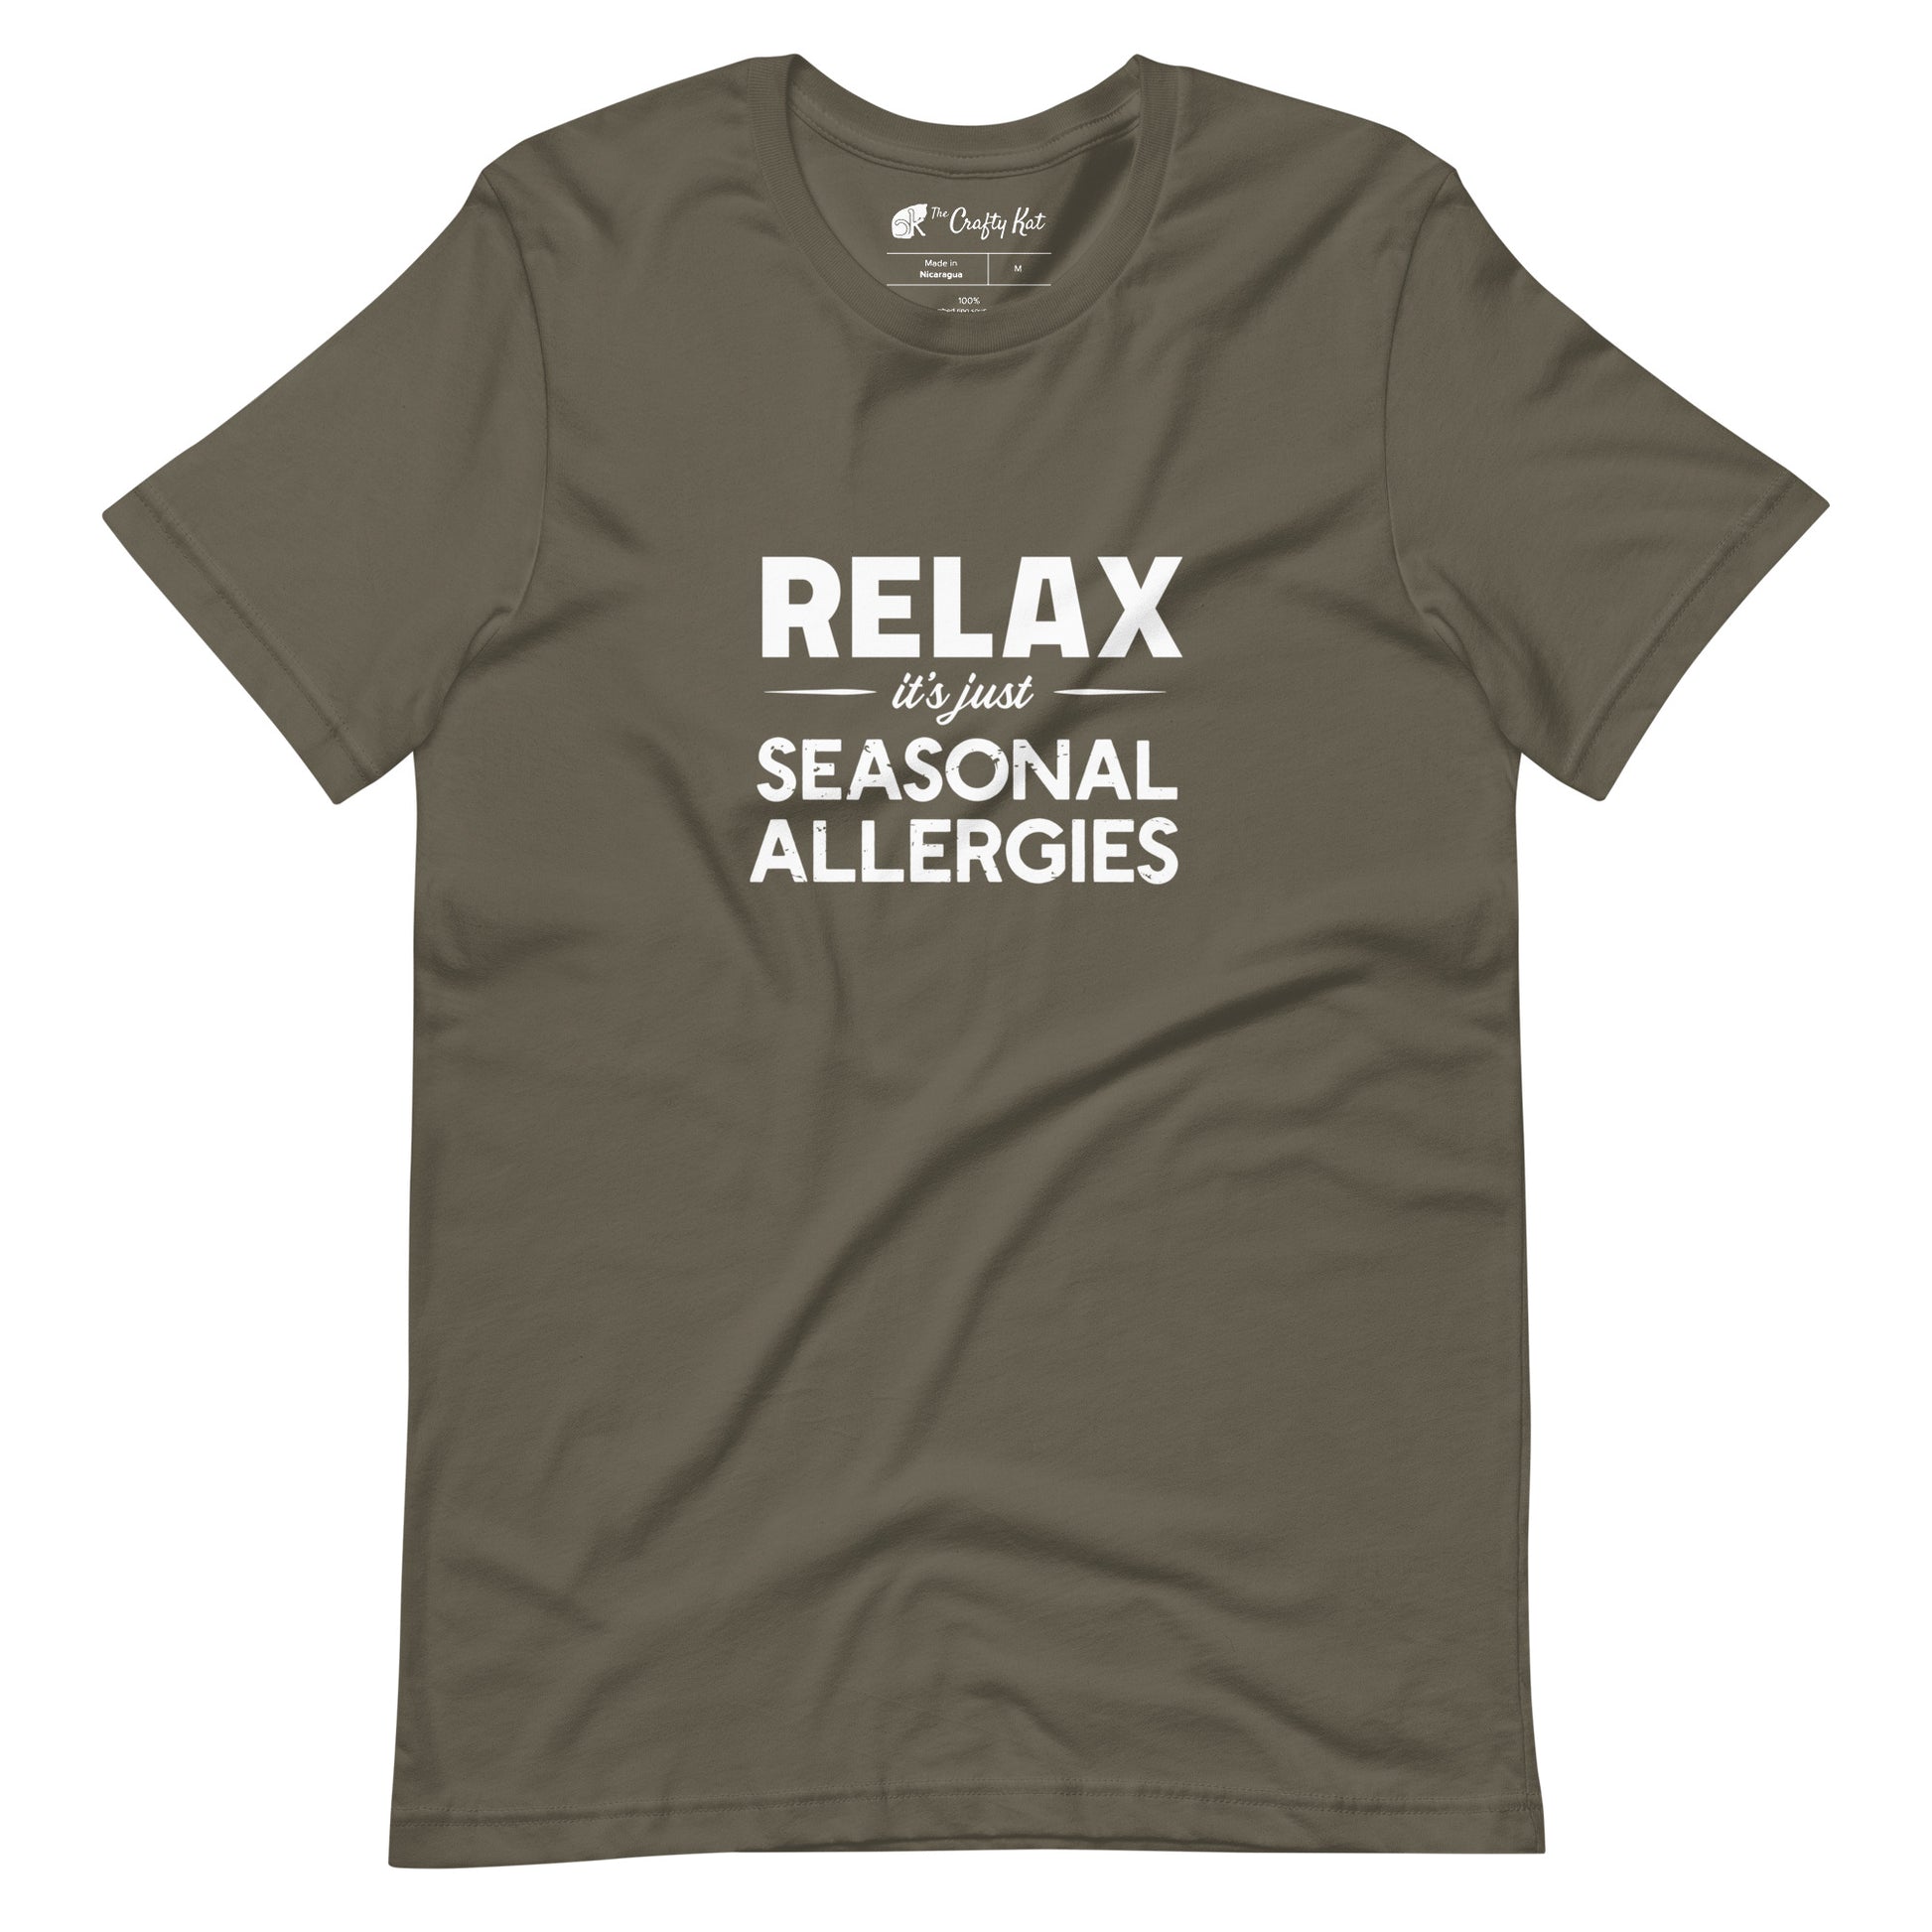 Army (olive tan) t-shirt with white graphic: "RELAX it's just SEASONAL ALLERGIES"